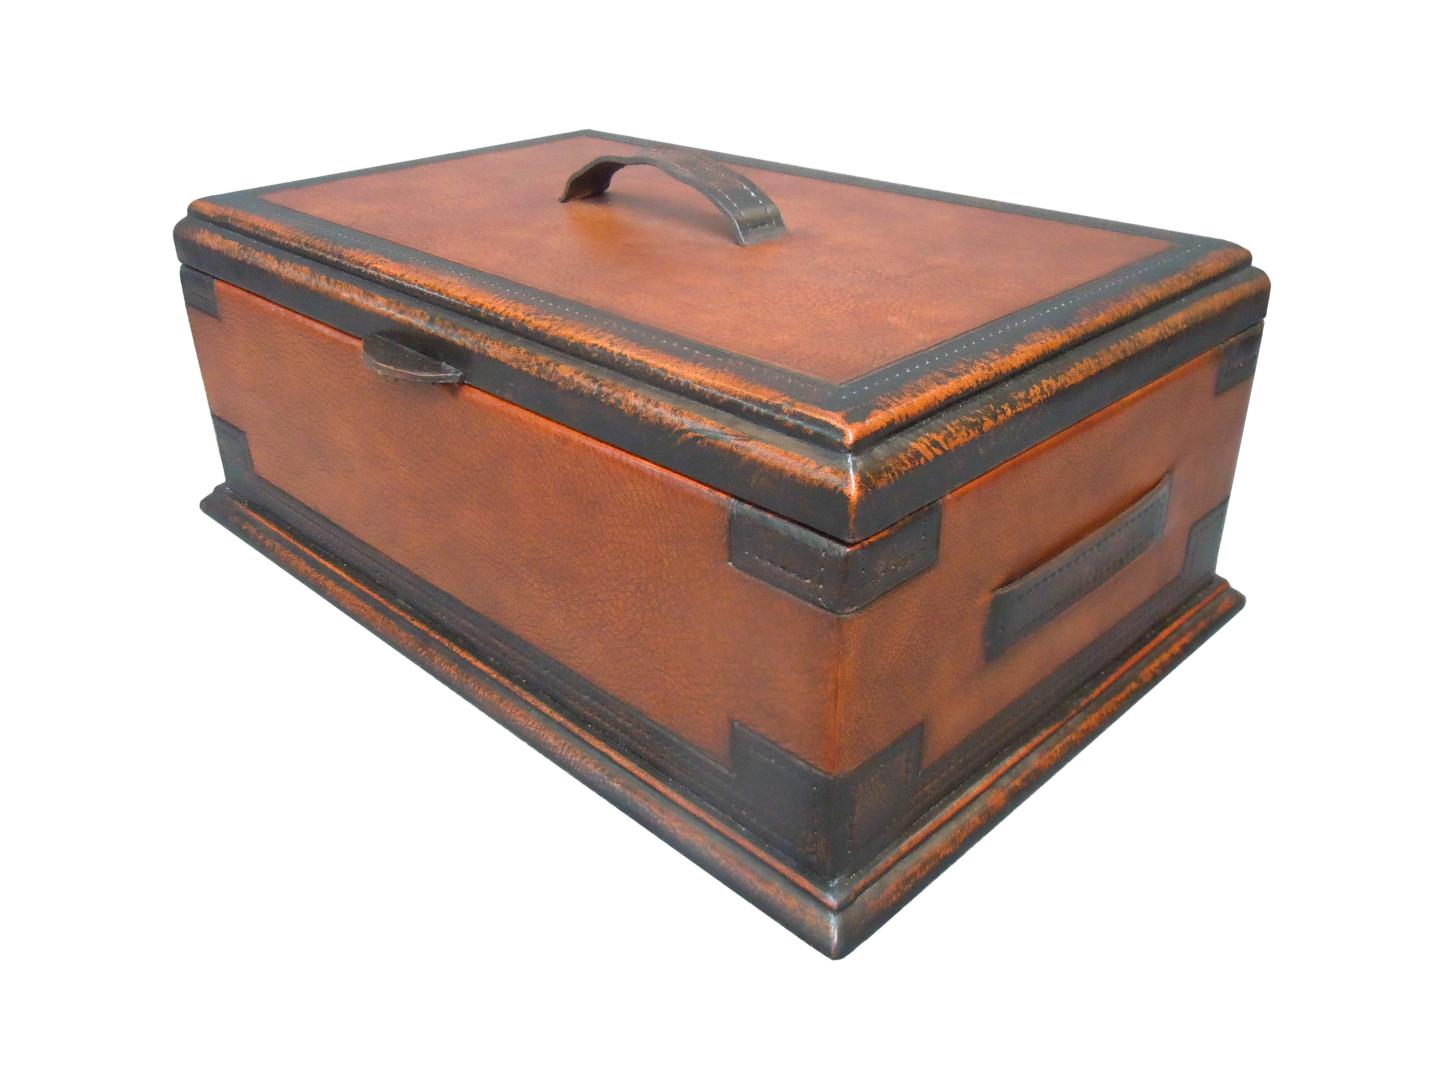 leather box with belts on the sides and top of the box